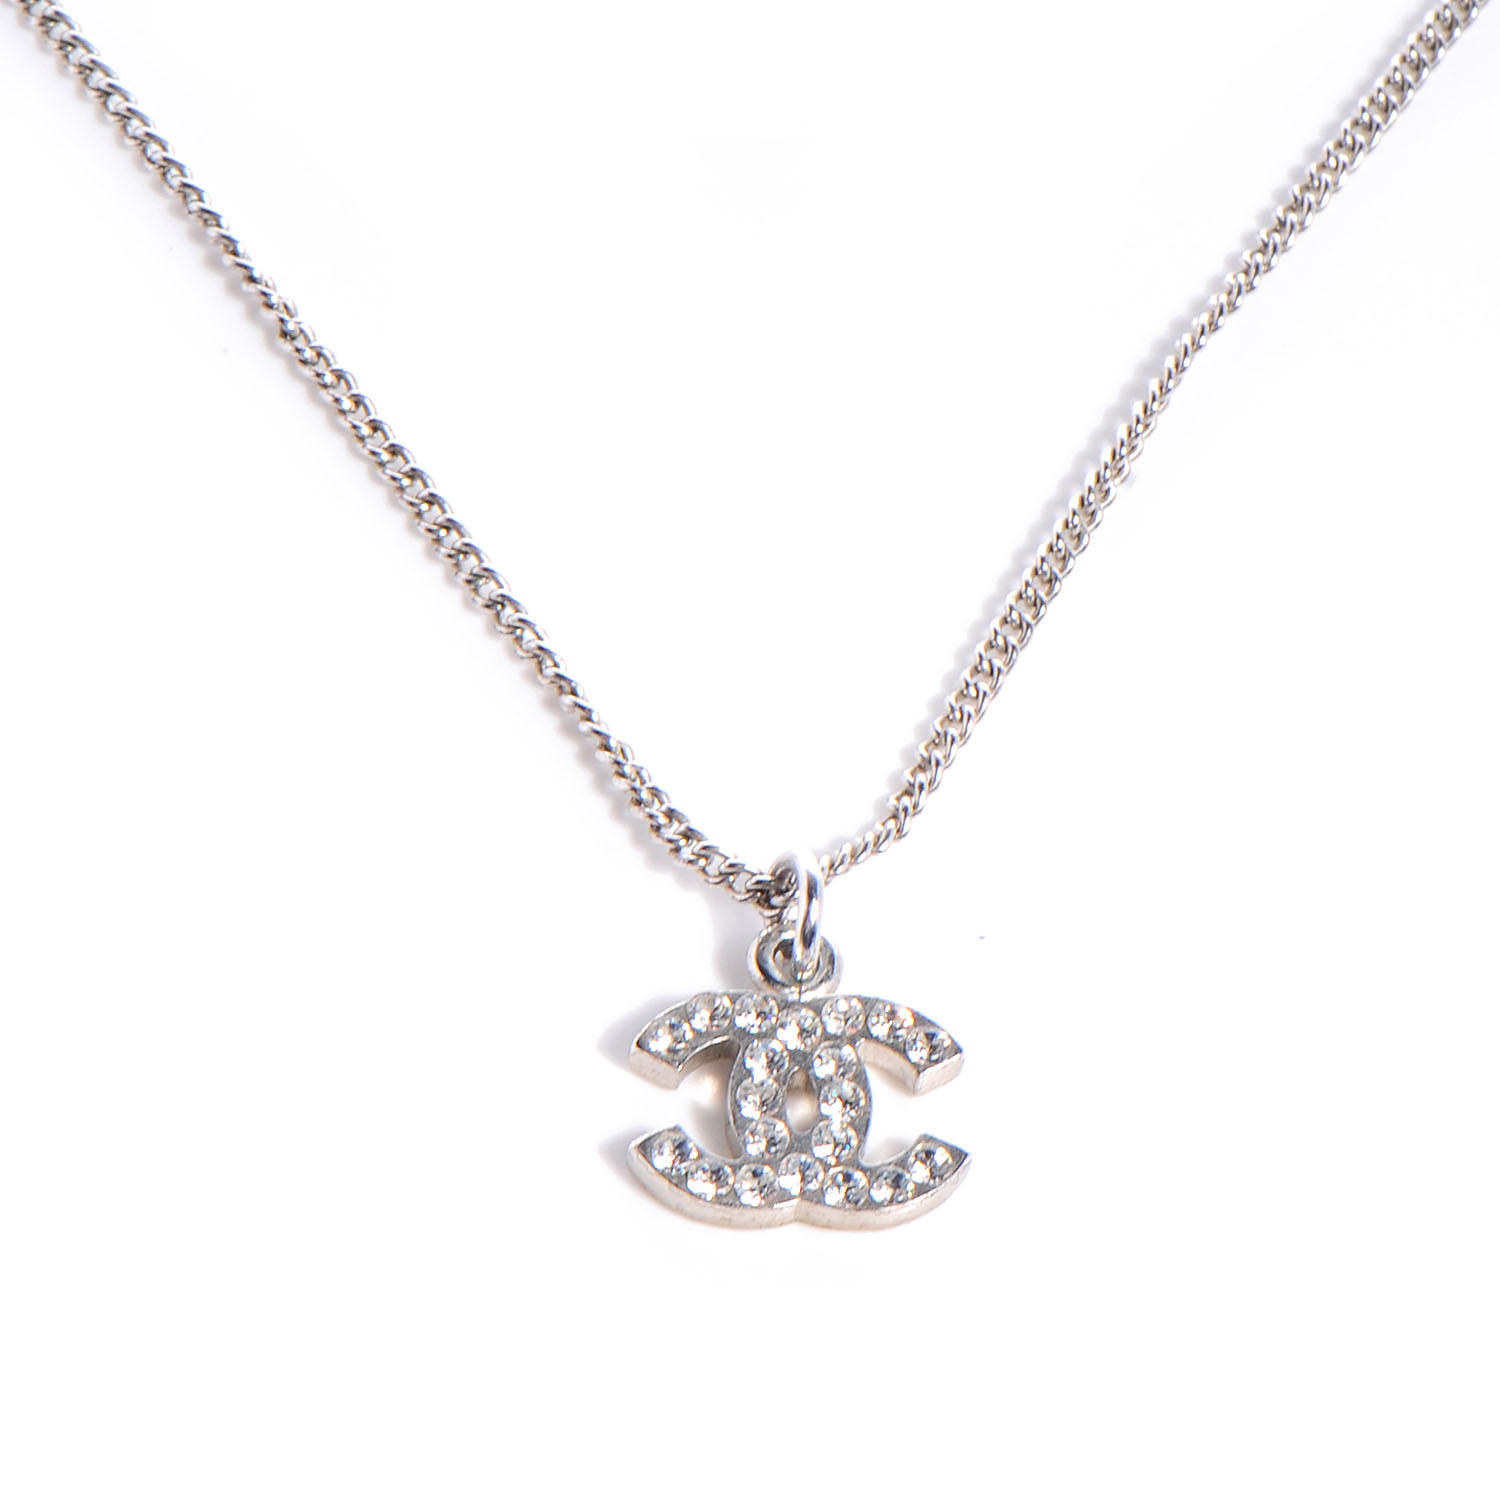 Chanel Pendant Necklace
 CHANEL Crystal CC Necklace Silver